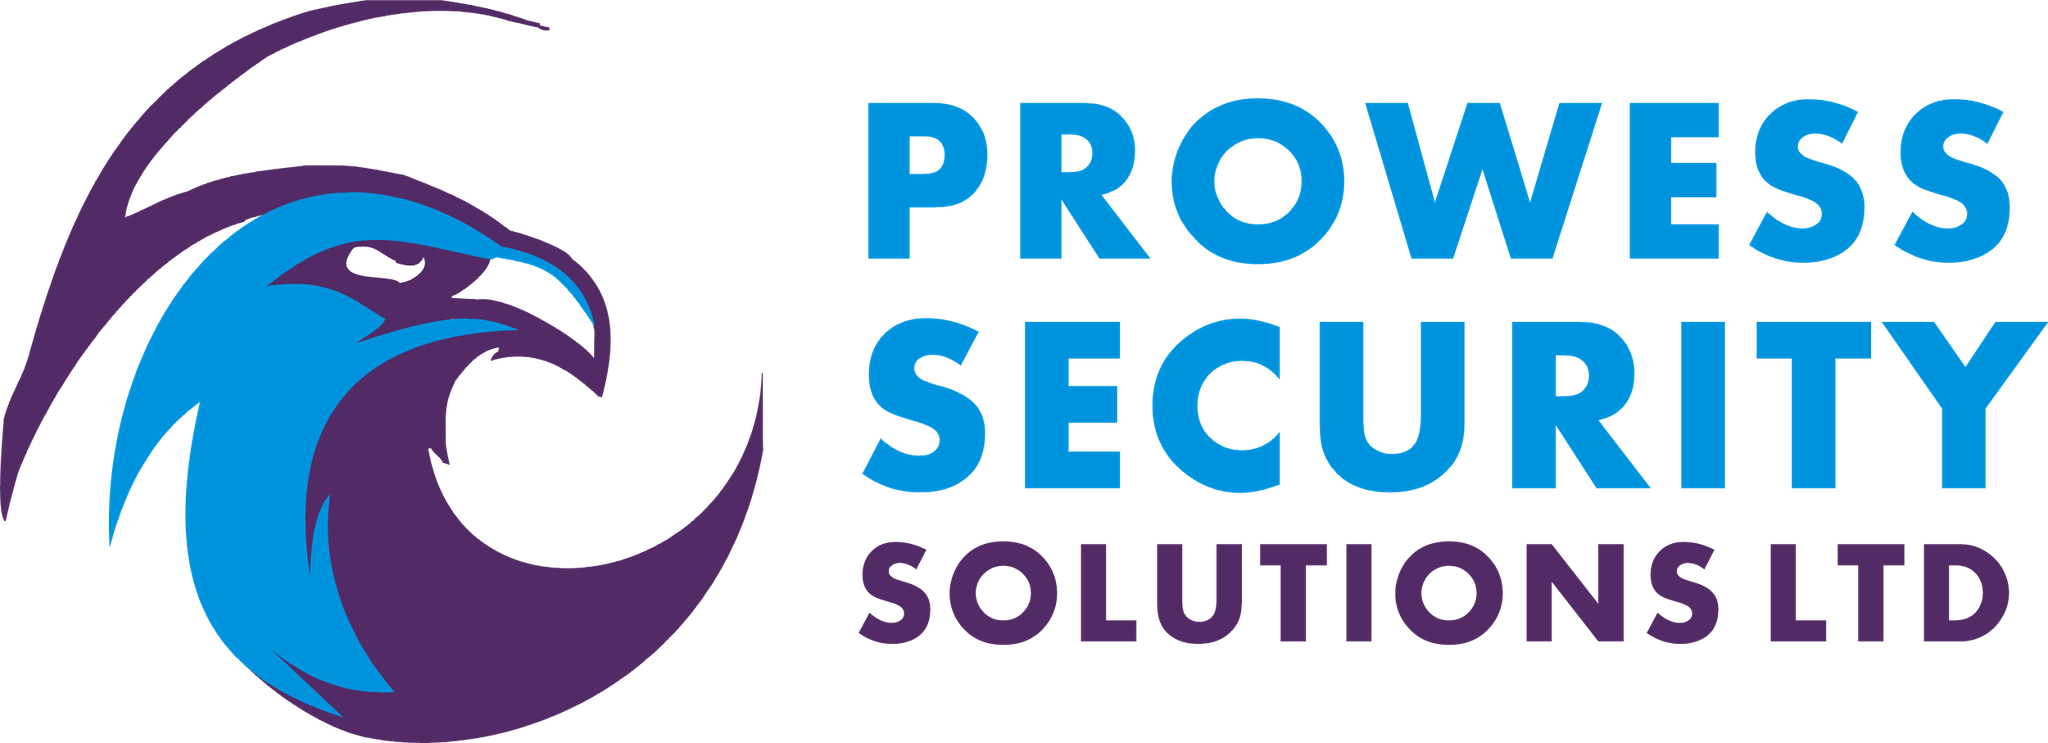 Logo of Prowess Security Solutions Ltd Business And Management Consultants In Dundee, Scotland